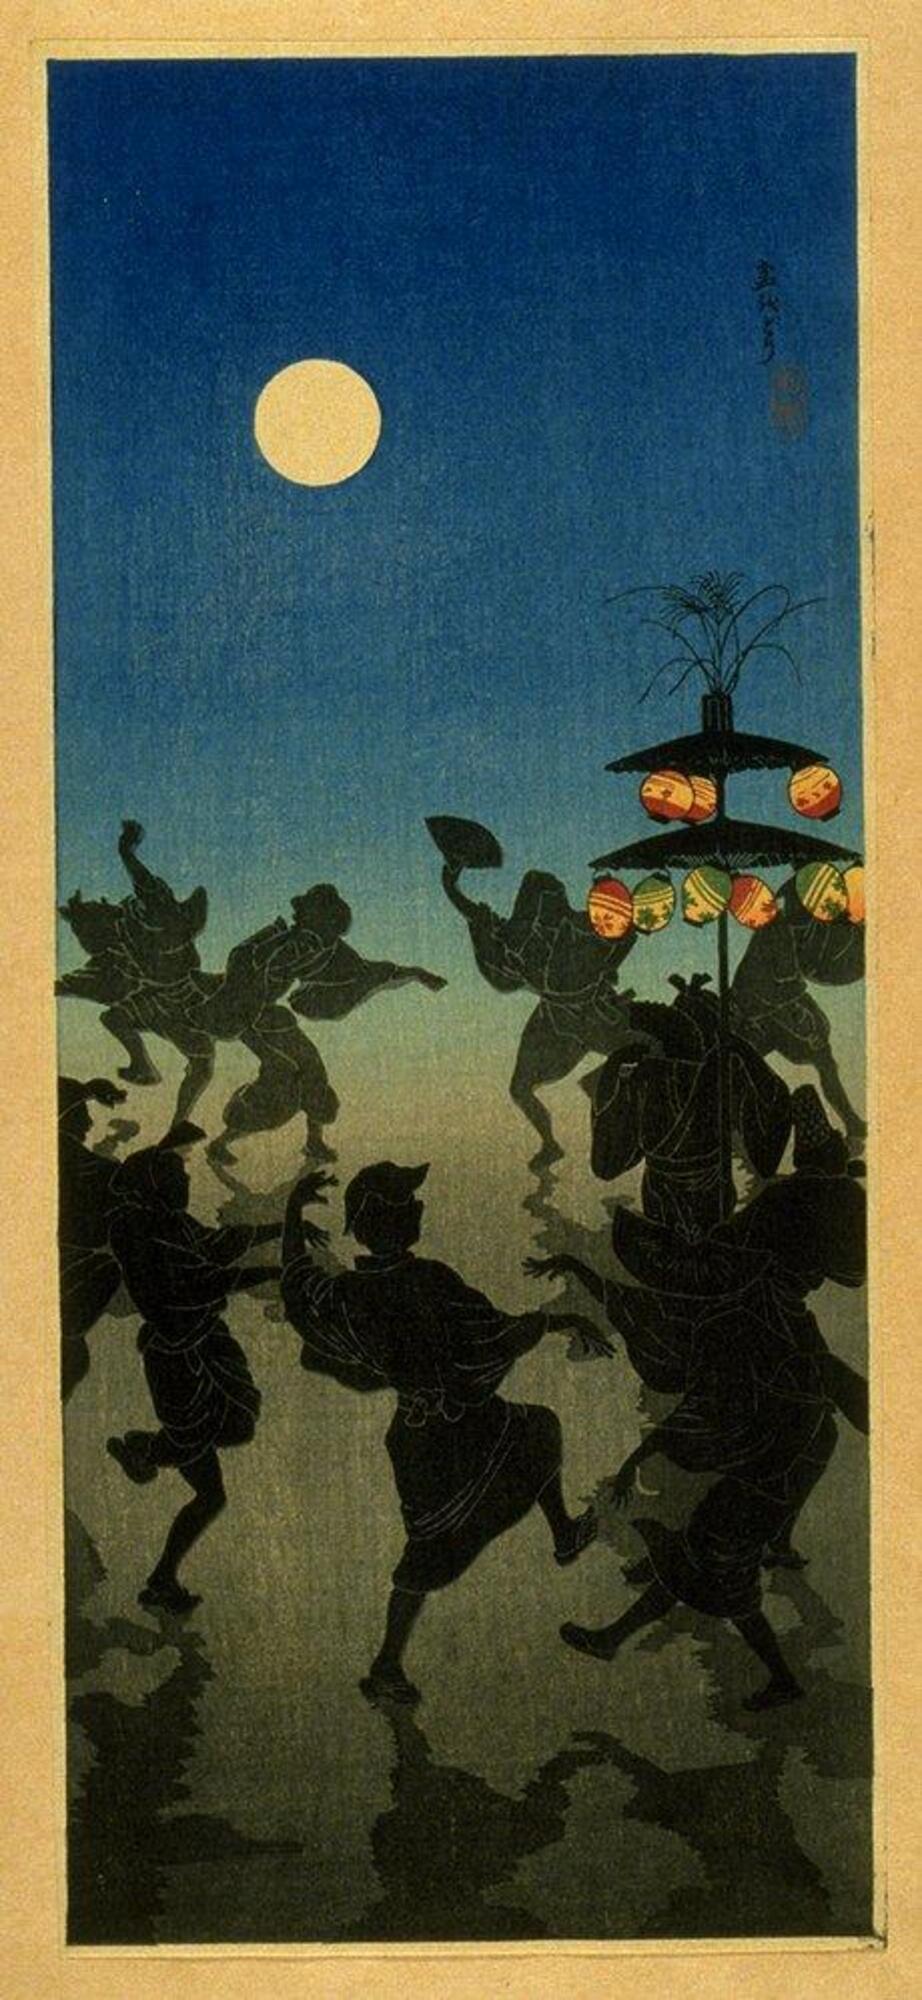 A circle of festival-goers dances under a full moon. They only appear in silhouette, but the shapes of their kimono and fans in hand can be seen.